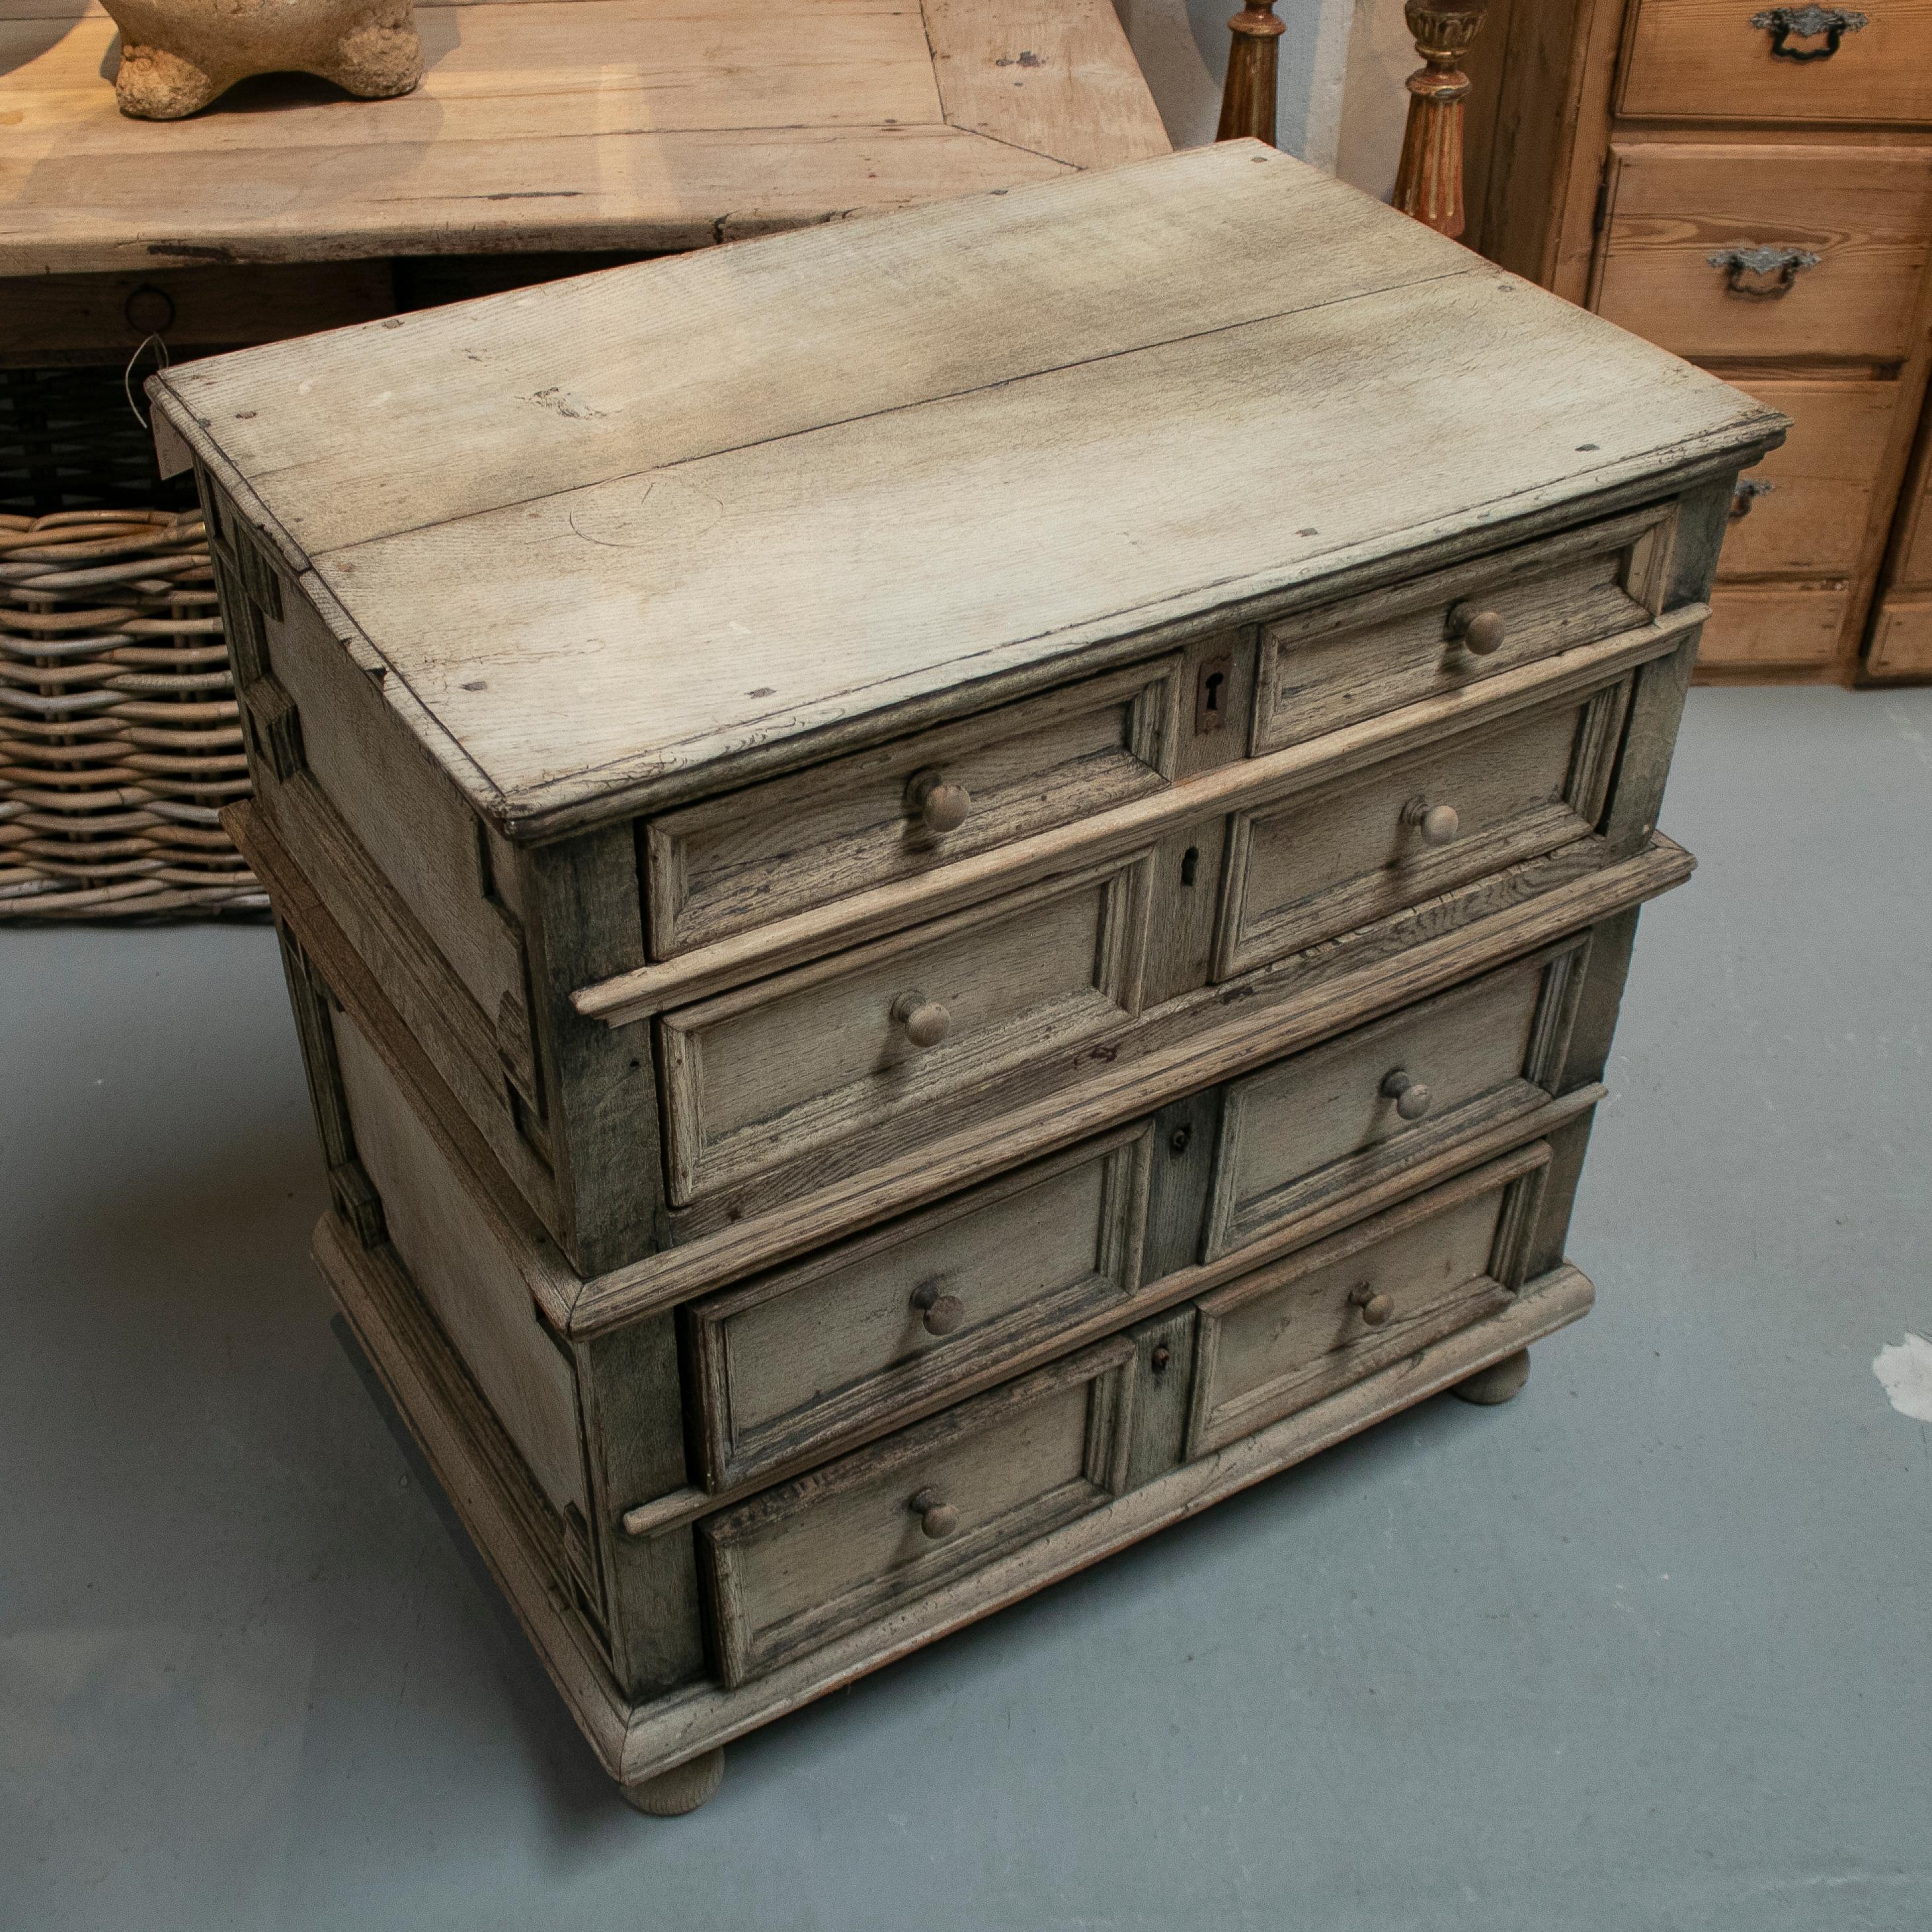 Antique 17th century English two part wooden chest of drawers in natural wood finish.
   